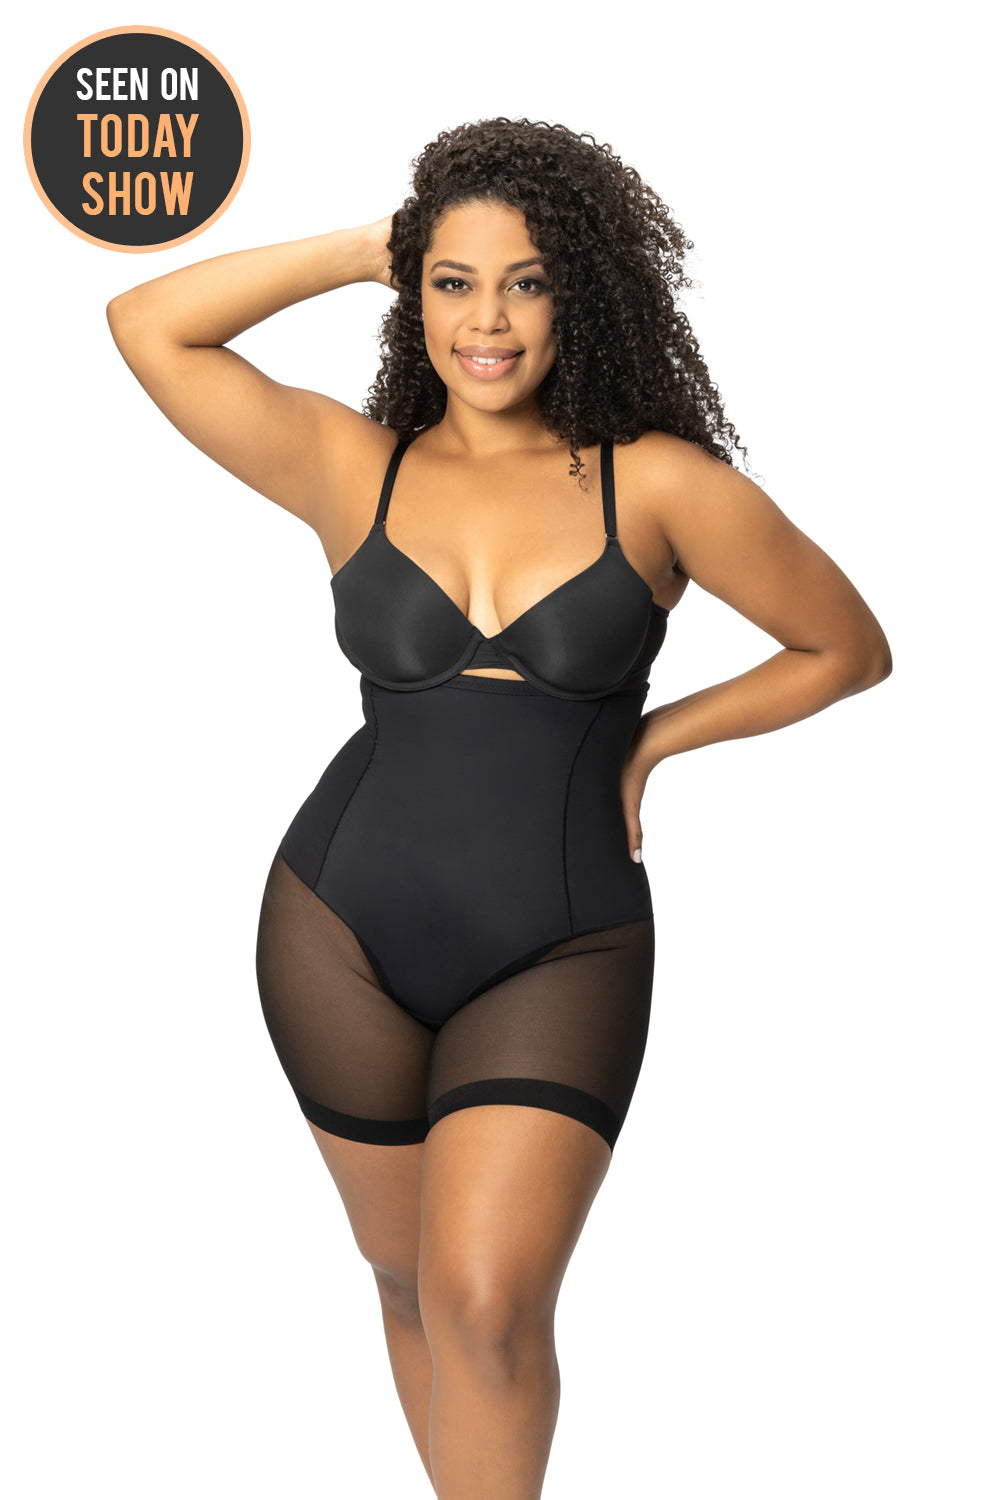 Total Comfort size large black shapewear shorts - $12 New With Tags - From  Melinda